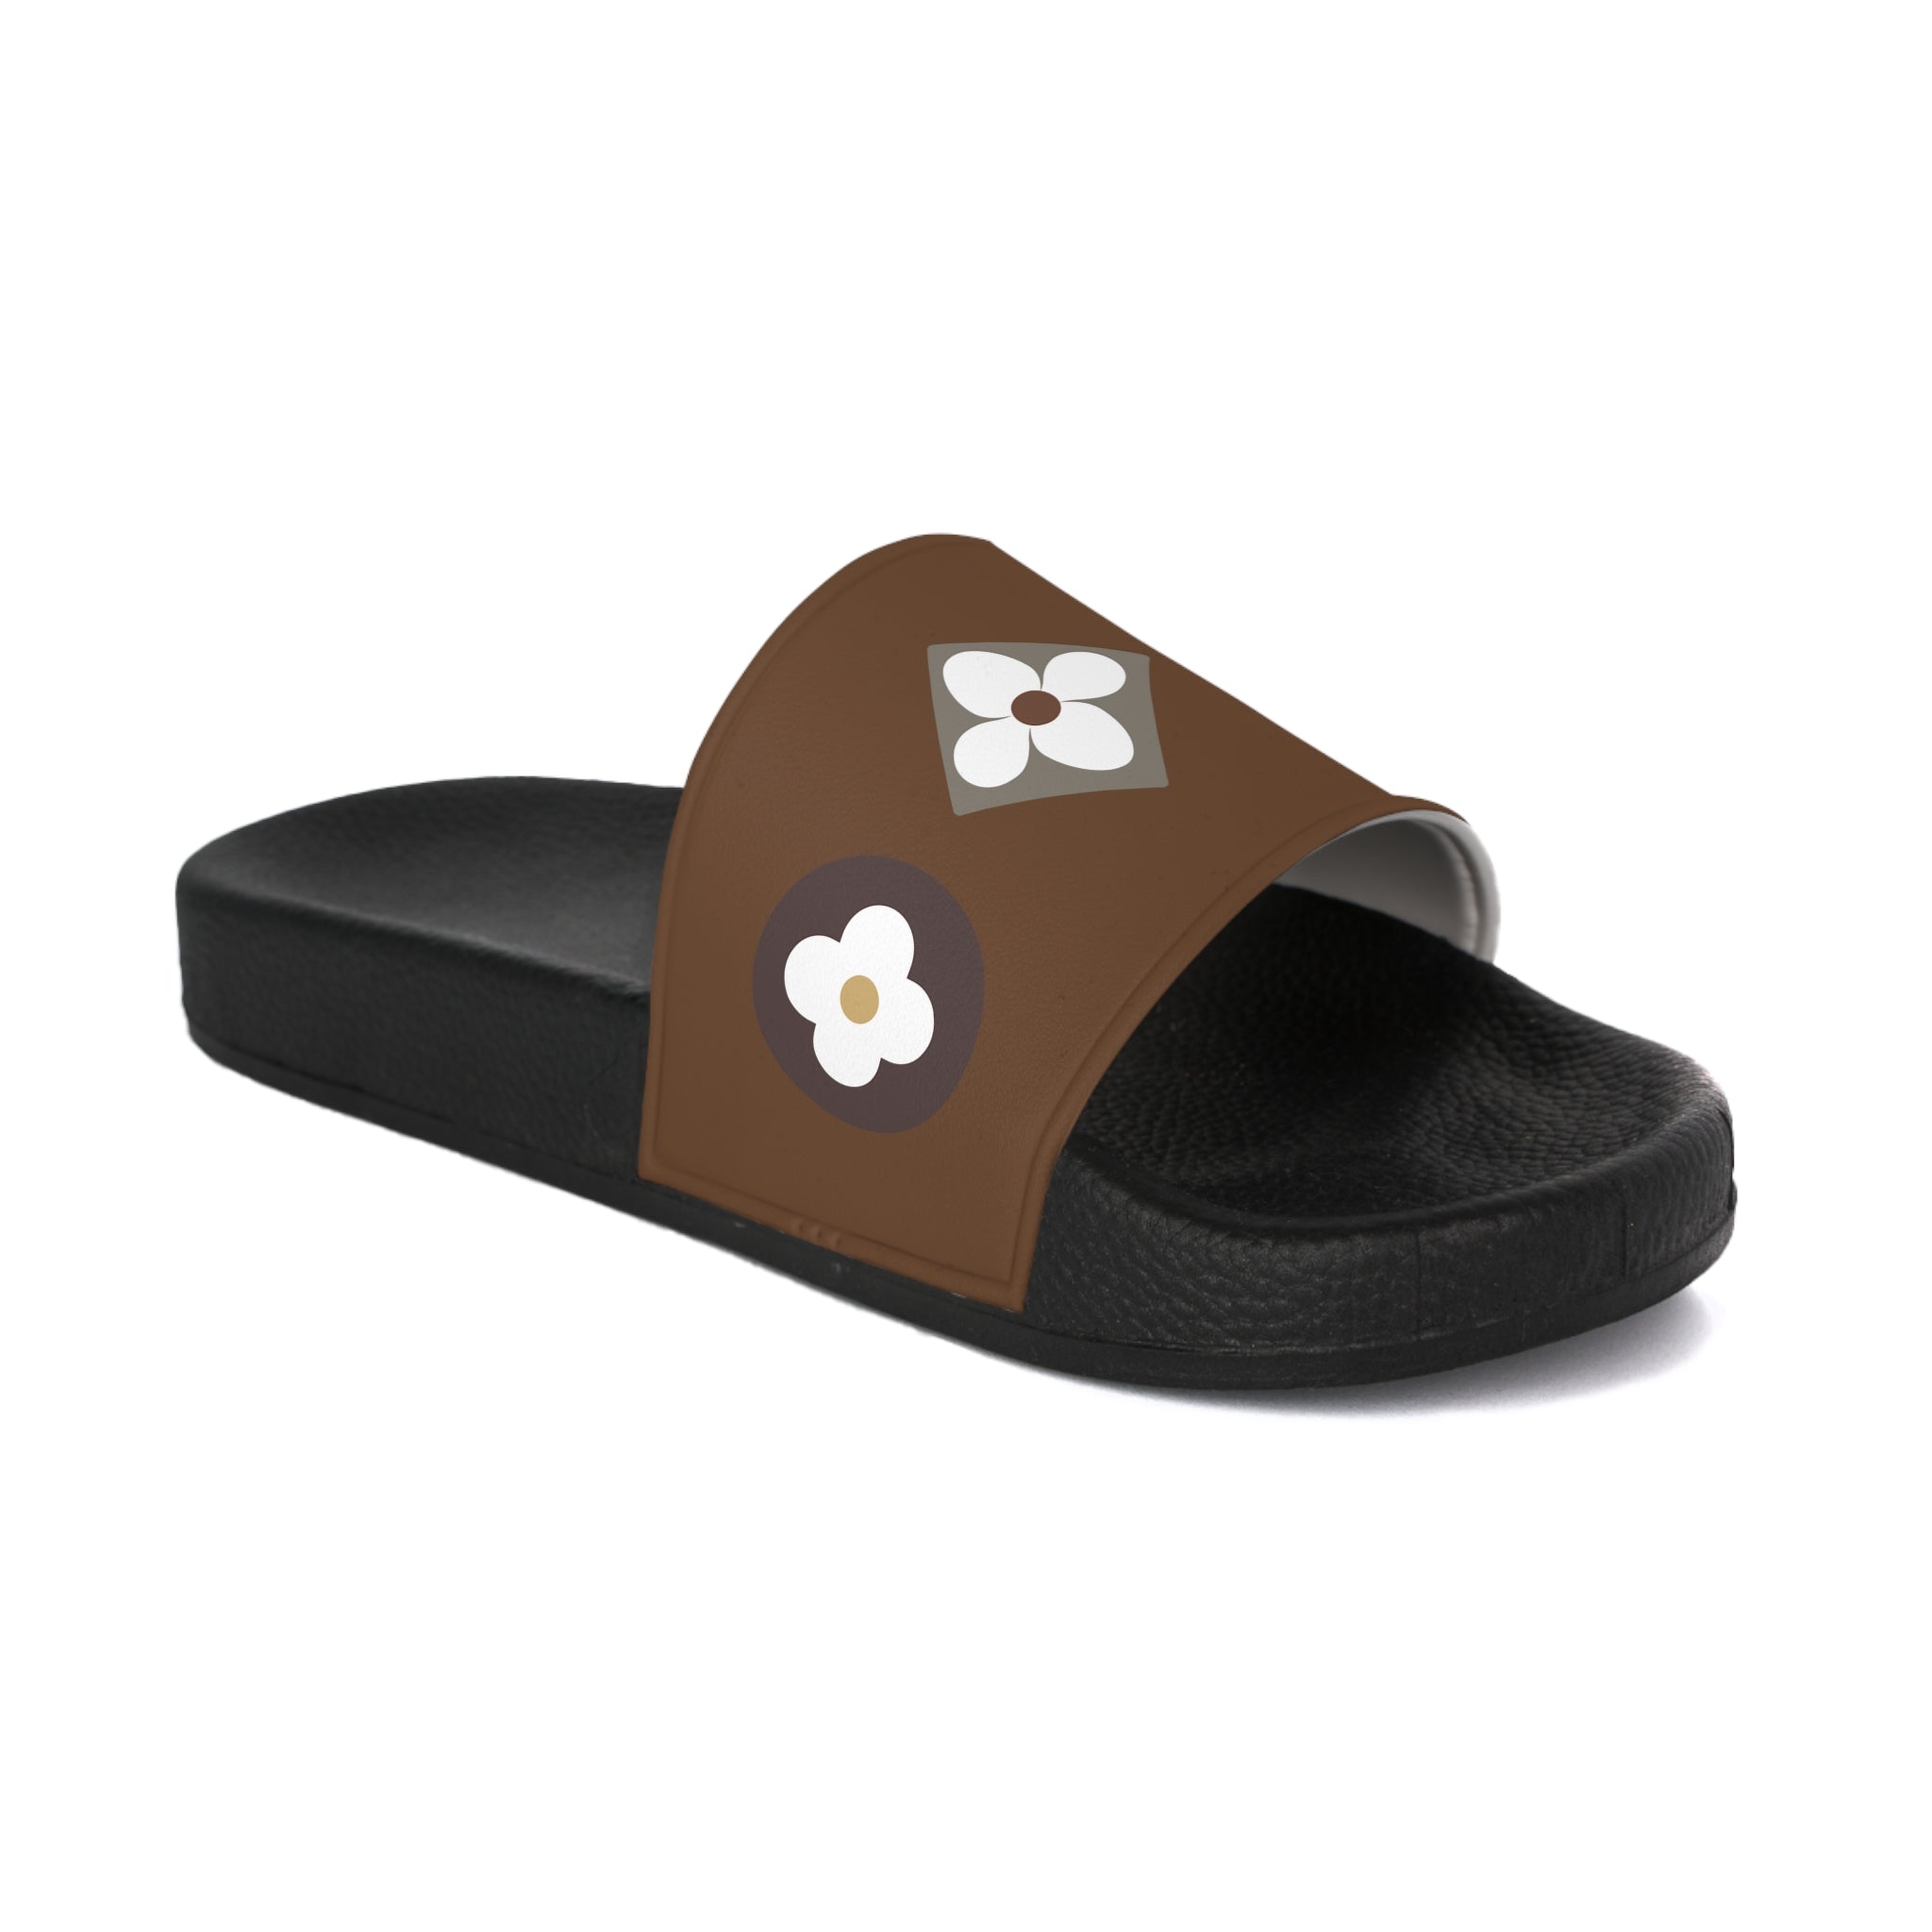  Casual Wear Collection Trilogy of Icons in Brown Women's Slide Sandals, Slide Sandals for Women, Plaid Slip Ons Sandals